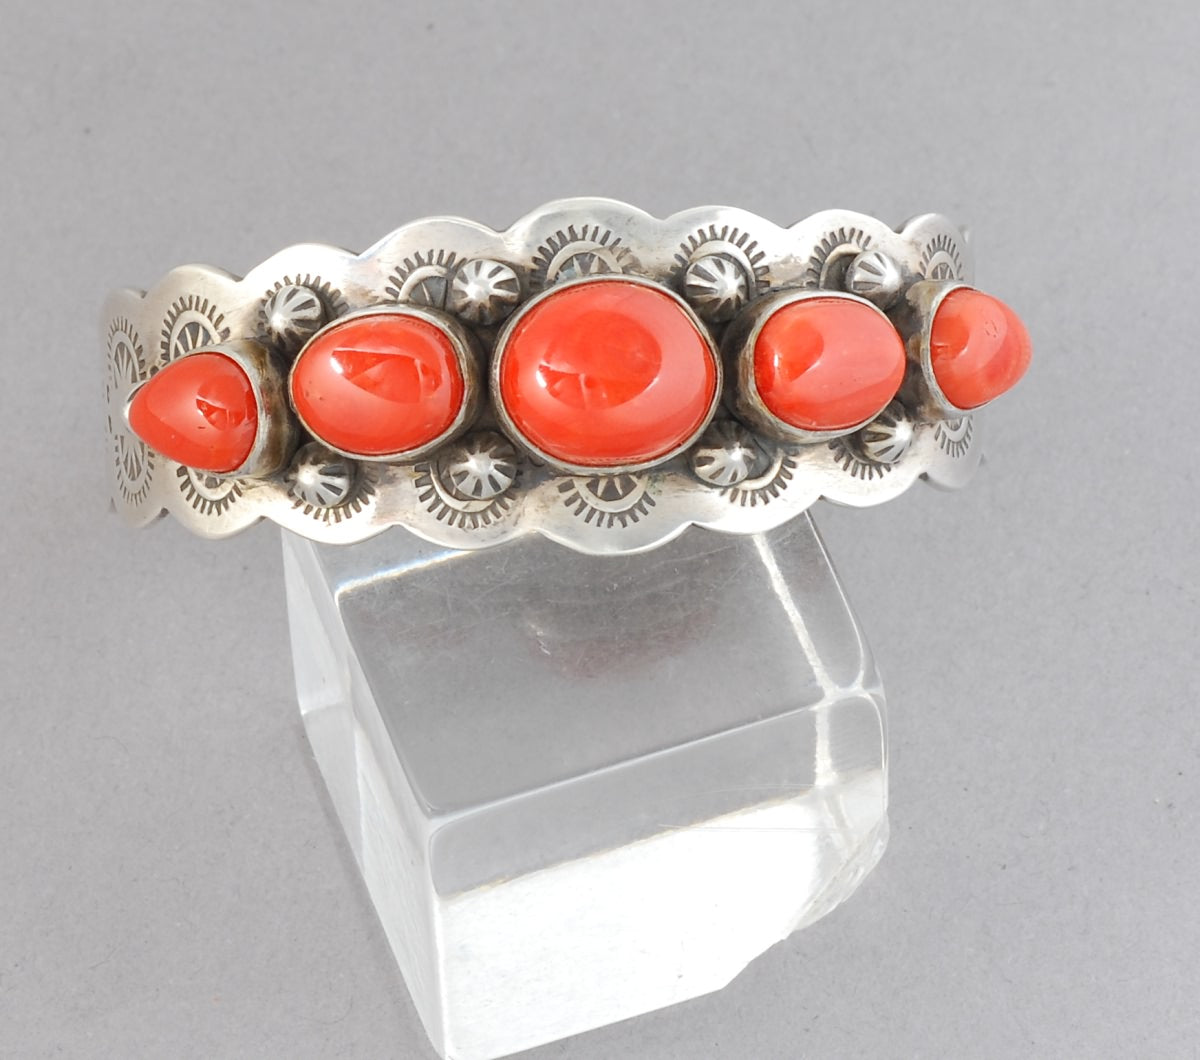 Cuff Bracelet with Red Coral by Randy Smith